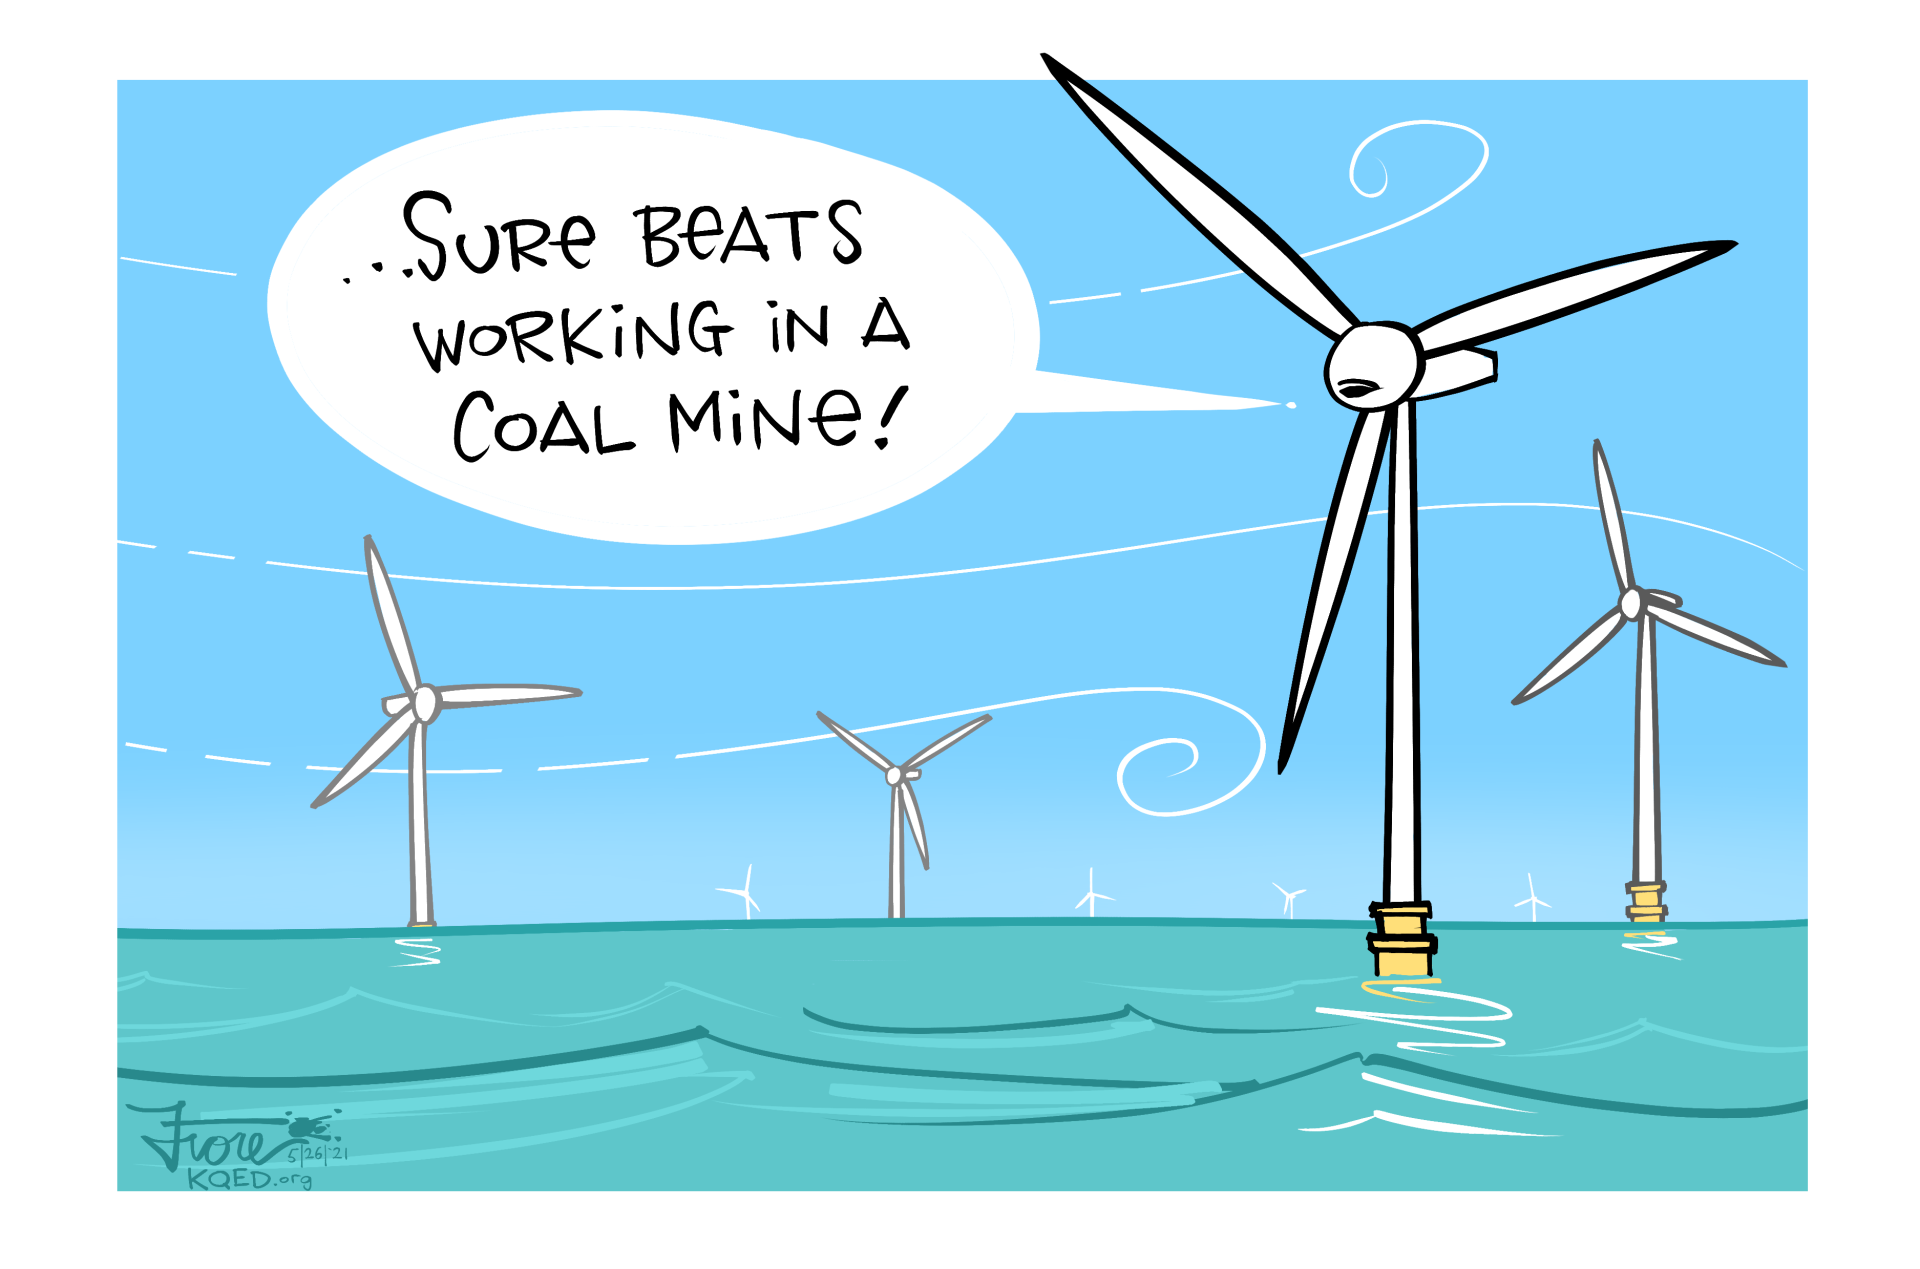 A Mark Fiore cartoon featuring an offshore wind farm, with one wind turbine saying, "...sure beats working in a coal mine!"